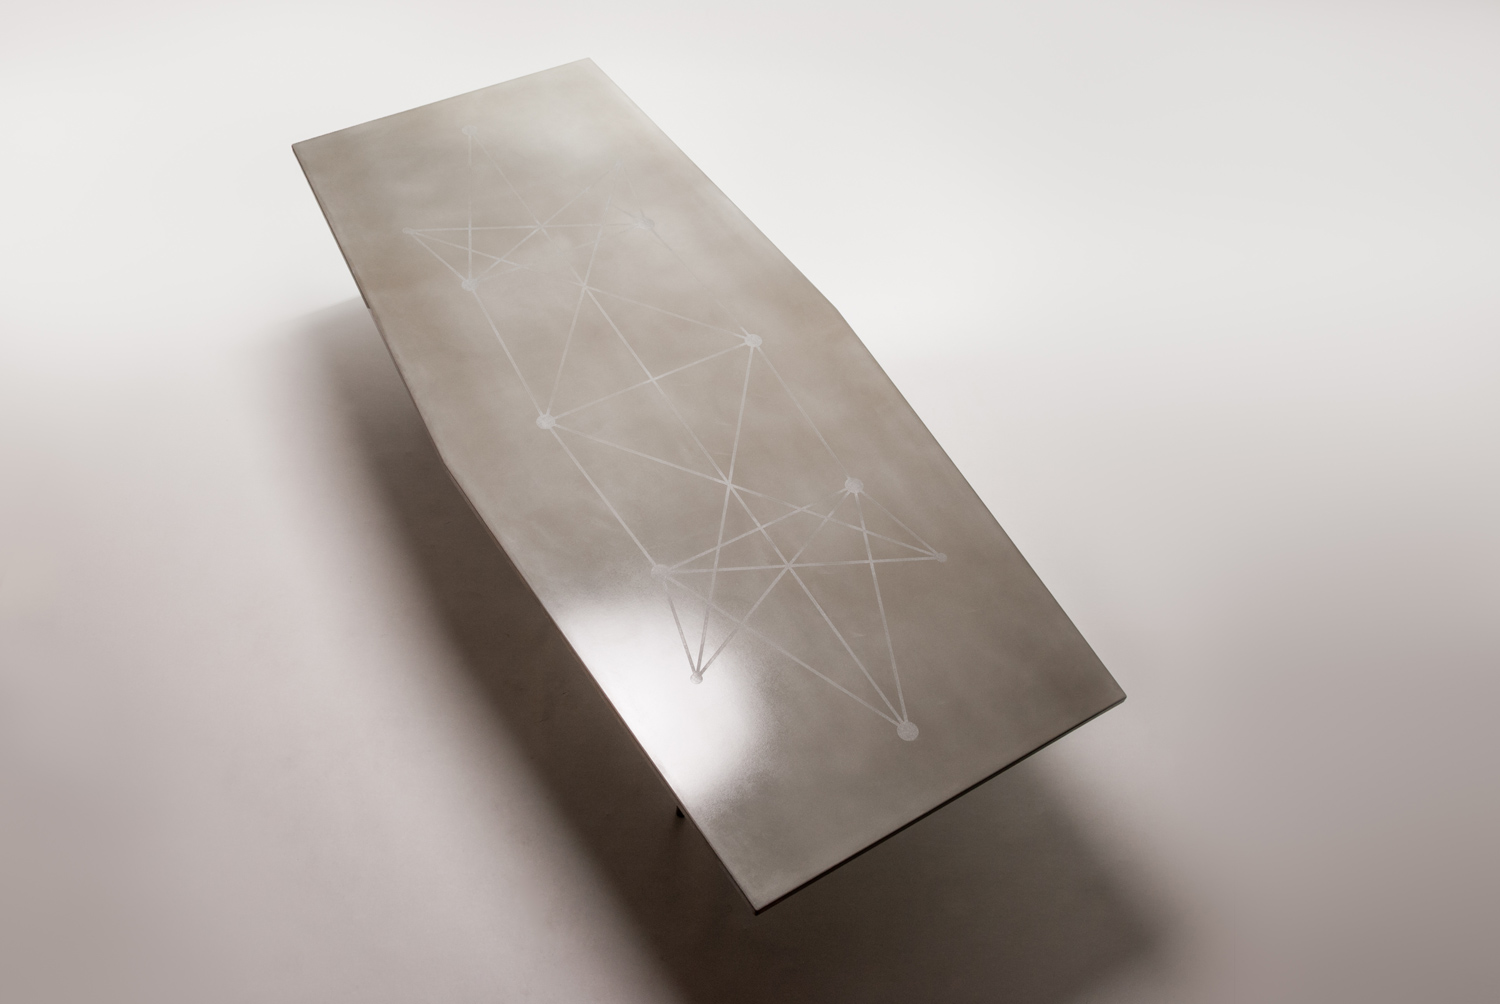 Decorative etching pattern on the surface of this custom concrete dining table